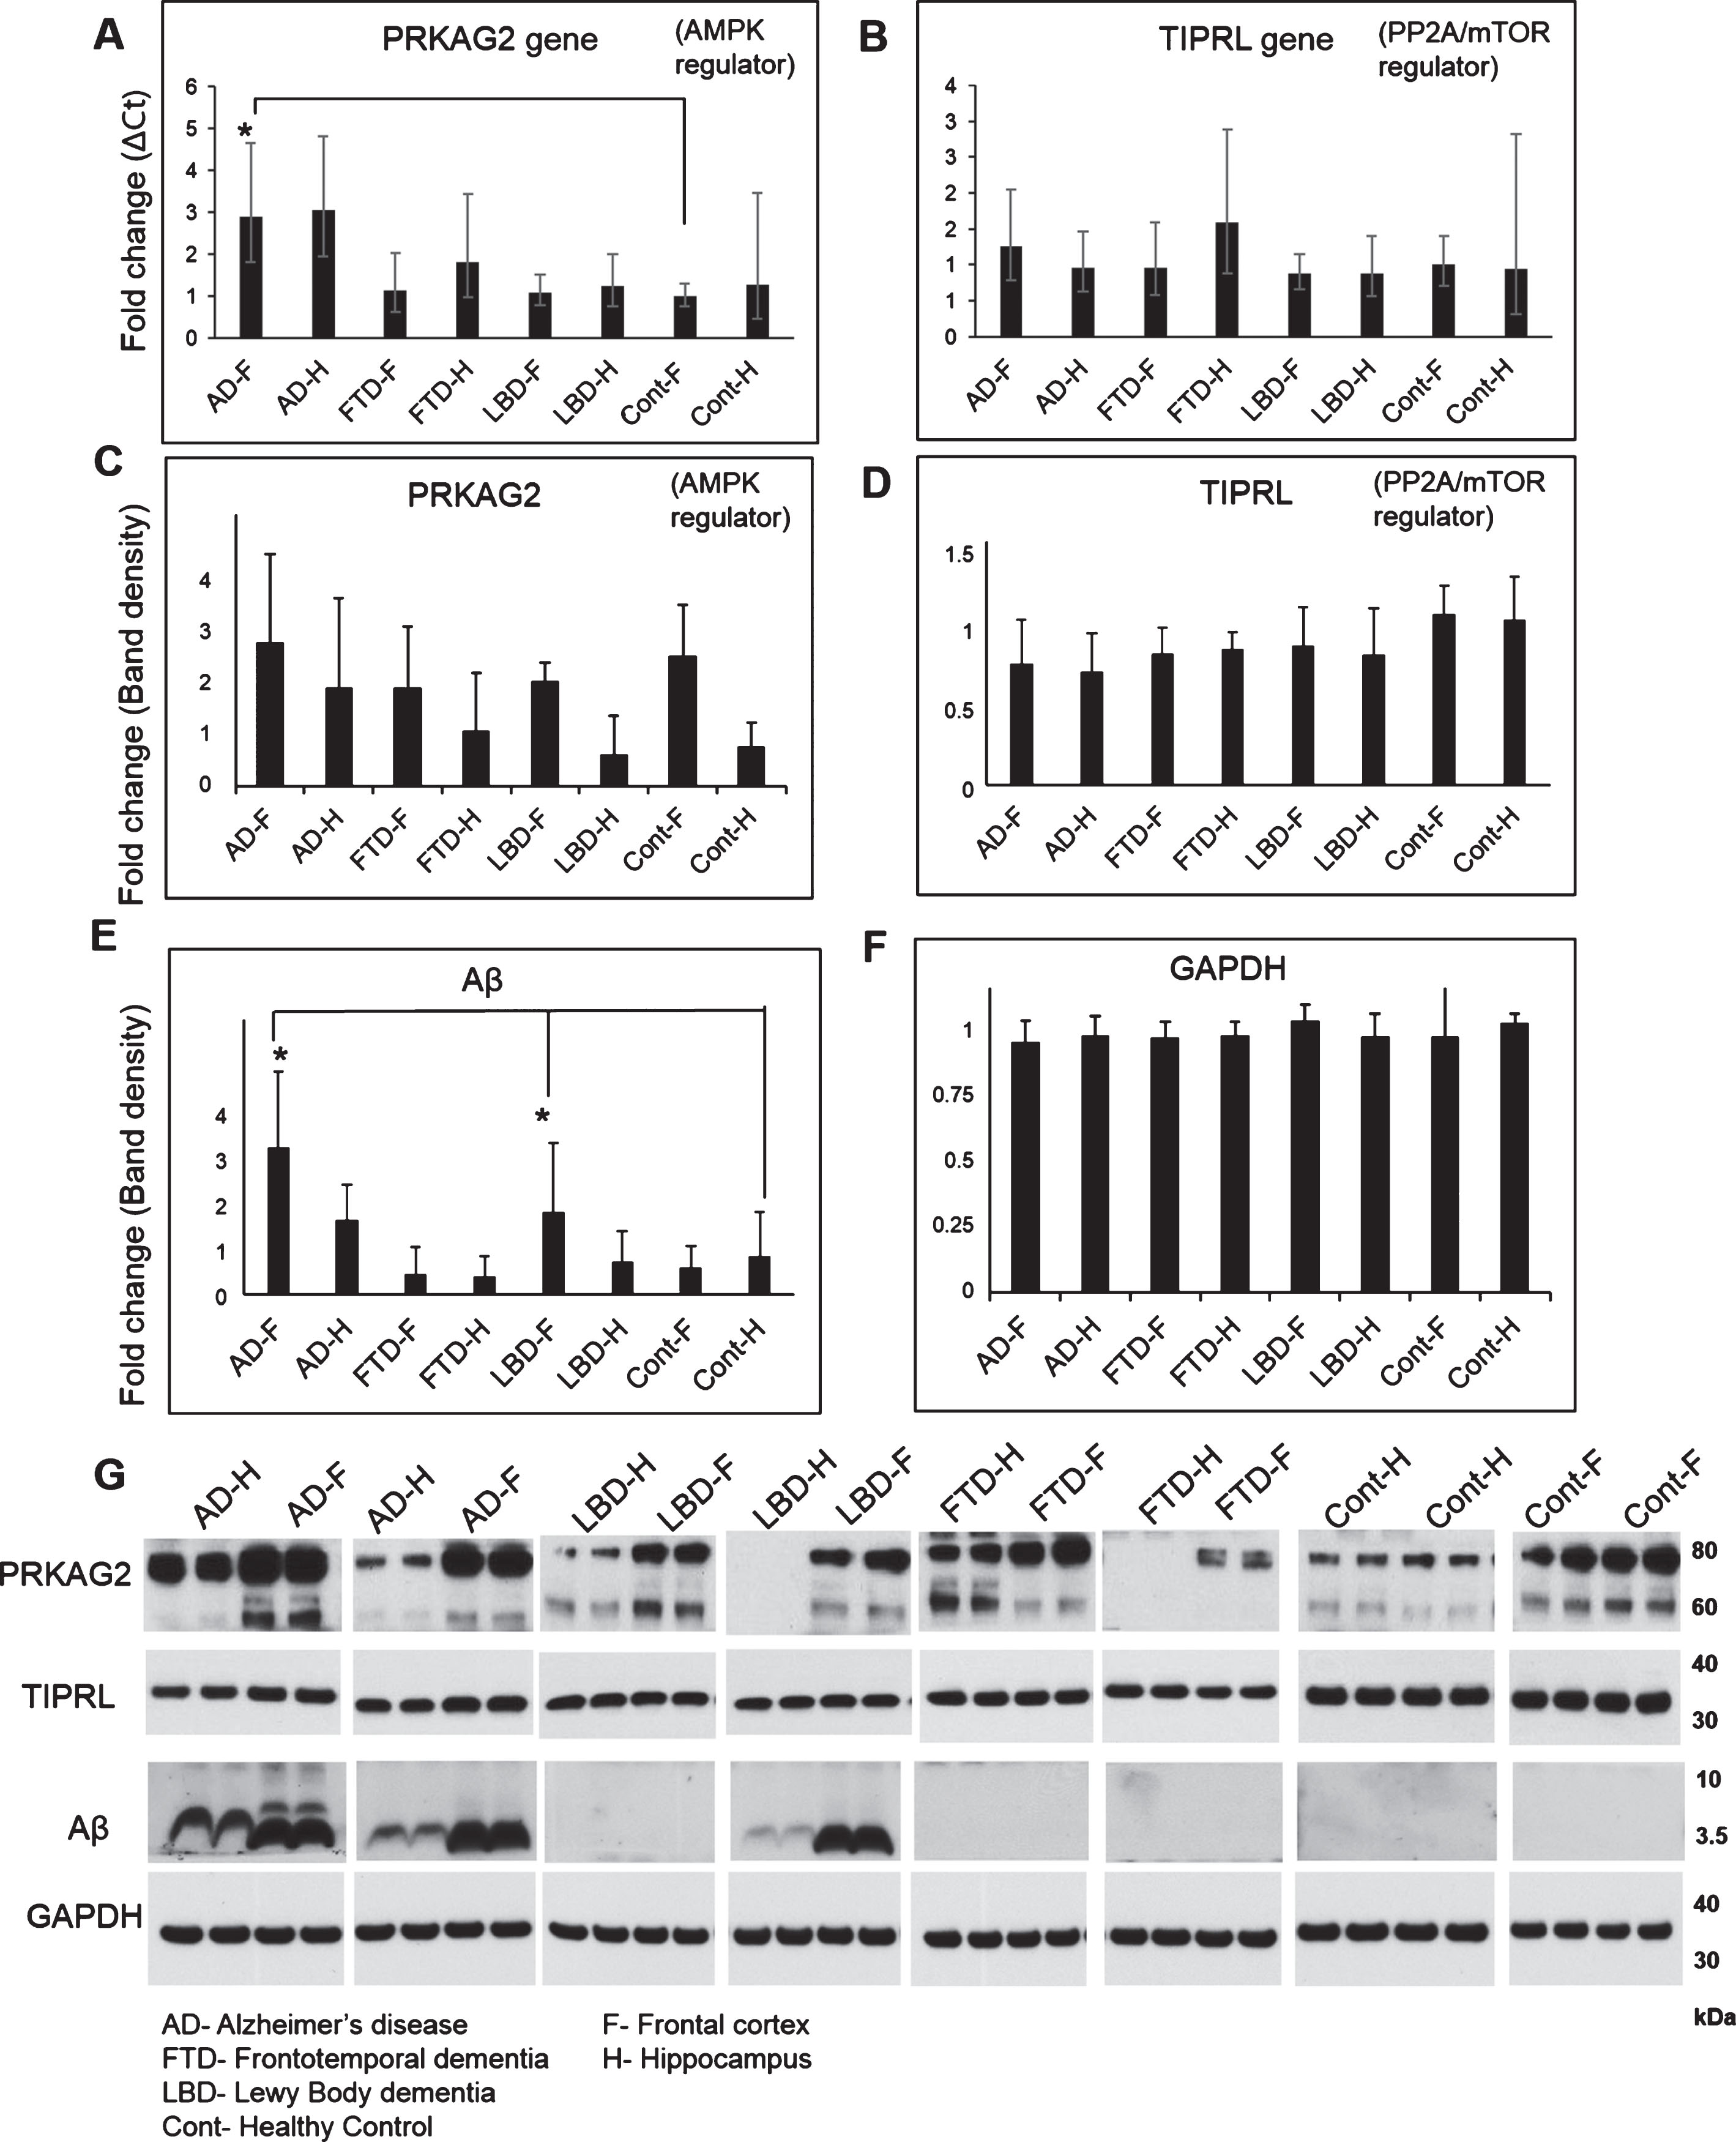 Gene and protein expression of autophagy regulators PRKAG2, TIPRL, and Aβ in AD, FTD, LBD, and control brains. Gene expression of autophagy regulators PRKAG2 (Hs00211903_m1), TIPRL (Hs00295580_m1), and endogenous control GAPDH (Hs03929097_g1) was conducted on cDNA synthesized from homogenates of frontal cortex (F) and hippocampus (H) regions of postmortem brain tissues from AD, LBD, FTD, and healthy controls (Cont) using Taqman assays on the QuantStudio 12K system. Fold change in gene transcripts of PRKAG2 (A) and TIPRL (B) was measured using comparative Ct method with GAPDH as endogenous control and Cont-F as the reference biological group. A 3-fold increase in PRKAG2 transcripts was observed in AD-F as compared to FTD-F, LBD-F and Cont-F (Mean±SD, *p<0.05). No significant changes were observed in the expression of TIPRL between the different groups. Protein levels of PRKAG2 (C), TIPRL (D), Aβ (E), and GAPDH (F) was also measured using western blotting analysis of the brain homogenates. A representative image of the western blot is shown here (G). No significant change in levels of PRKAG2 (60 and 75 kDa isoforms) and TIPRL (32 kDa) were observed between the different groups. Aβ (4 kDa) was significantly higher in AD-F and LBD-F as compared to Cont-F (Mean±SD, *p < 0.05).